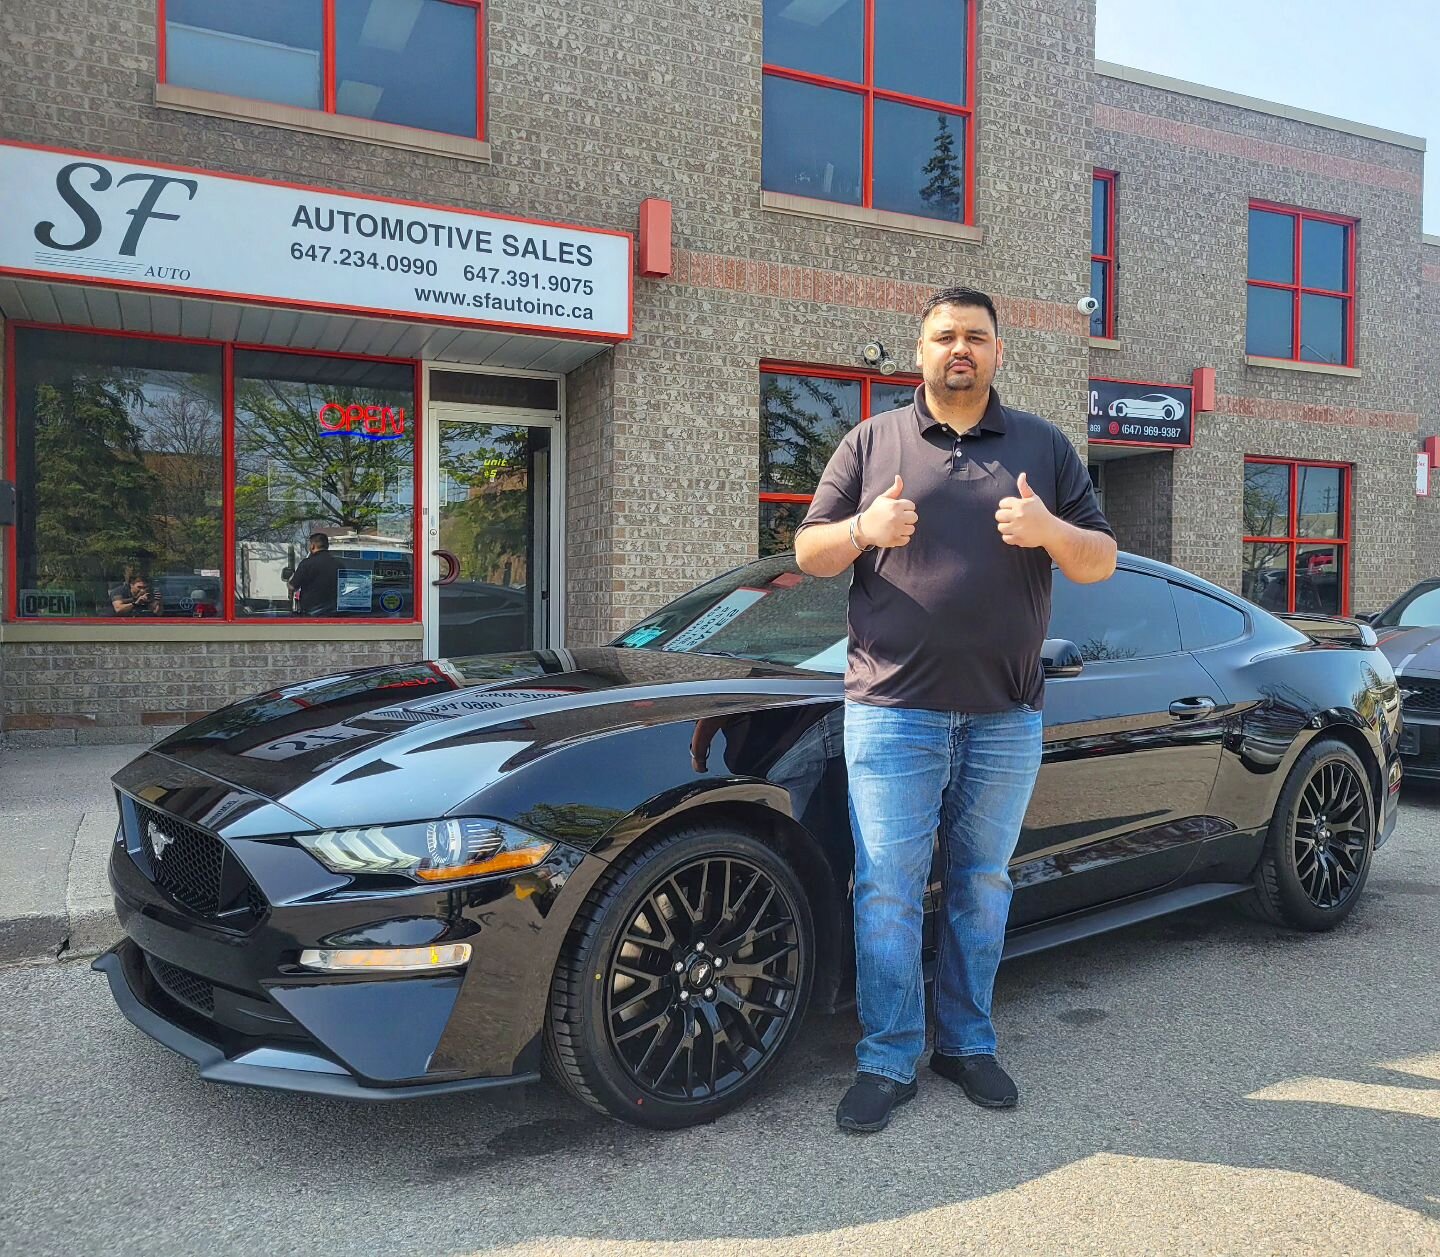 Congratulations Tanveer on your amazing new 2018 Ford Mustang GT 🏁 Thank you for trusting in SF Auto and welcome to our Family 💪🏁
.
.
.
.
.
.
.
.

.
.
.
.
.
.
.
.
#ford #GT #mustang #mustanggt #fordmustang #fordmustanggt #v8 #horsepower #pony #coy